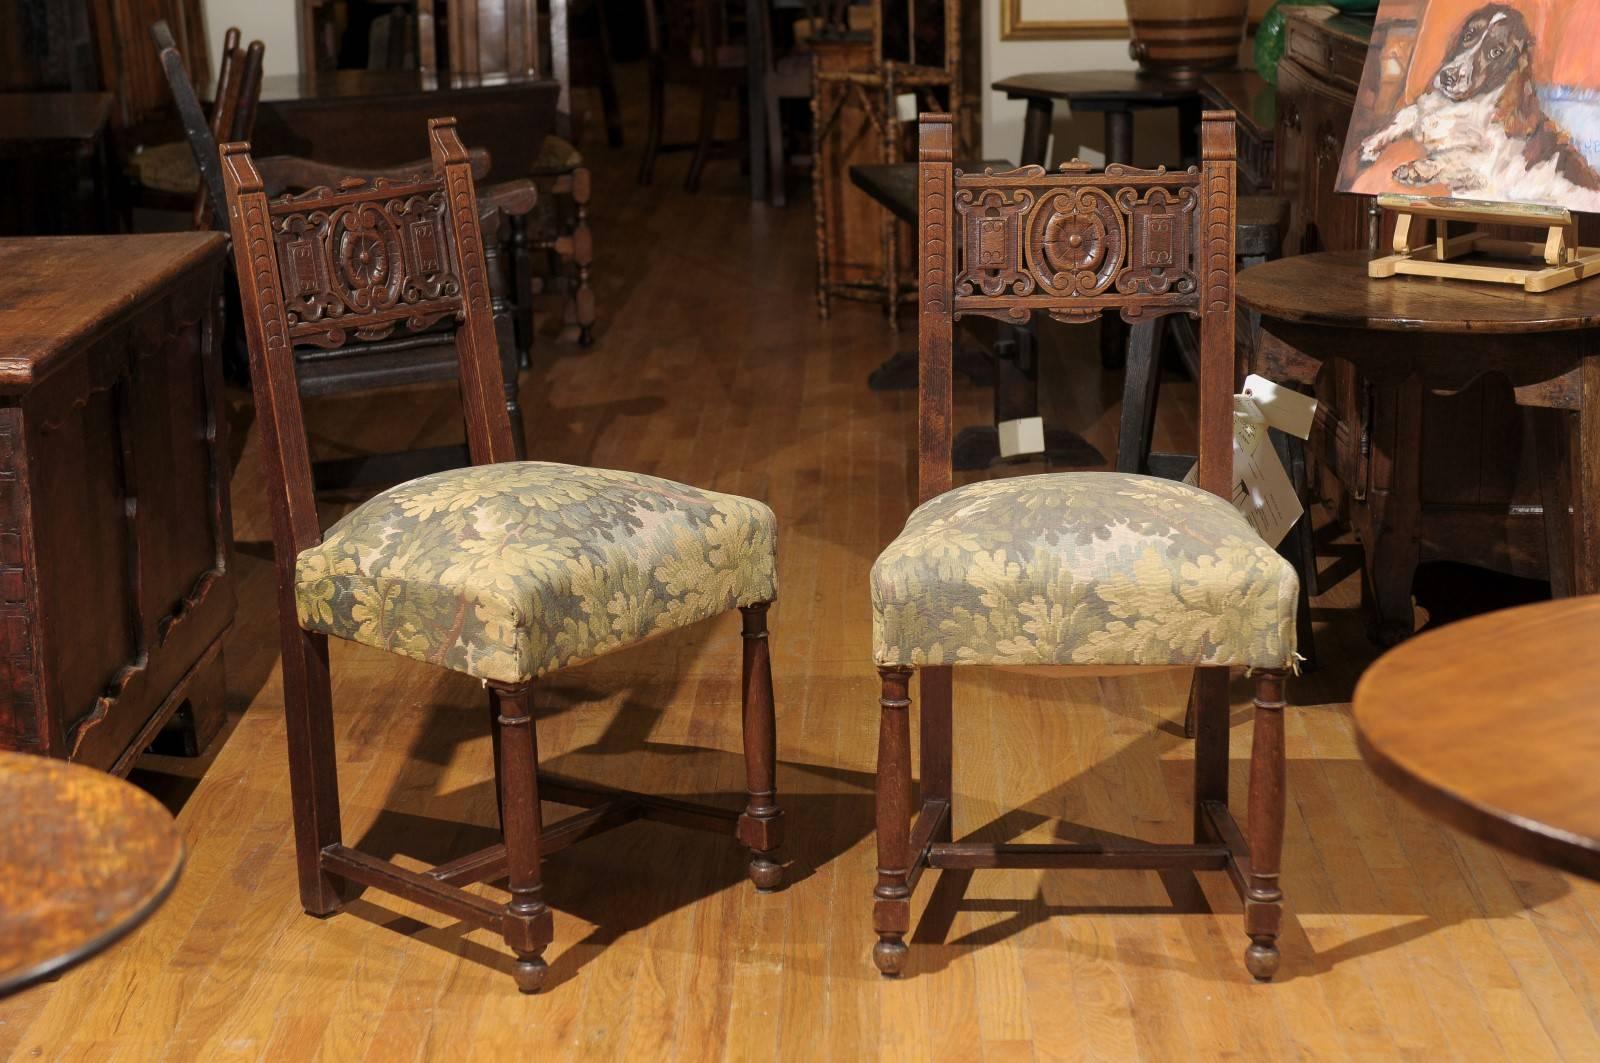 This pair of oak, upholstered chairs has backs that are hand-carved. The upholstery is a pale yellow, green and brown floral.